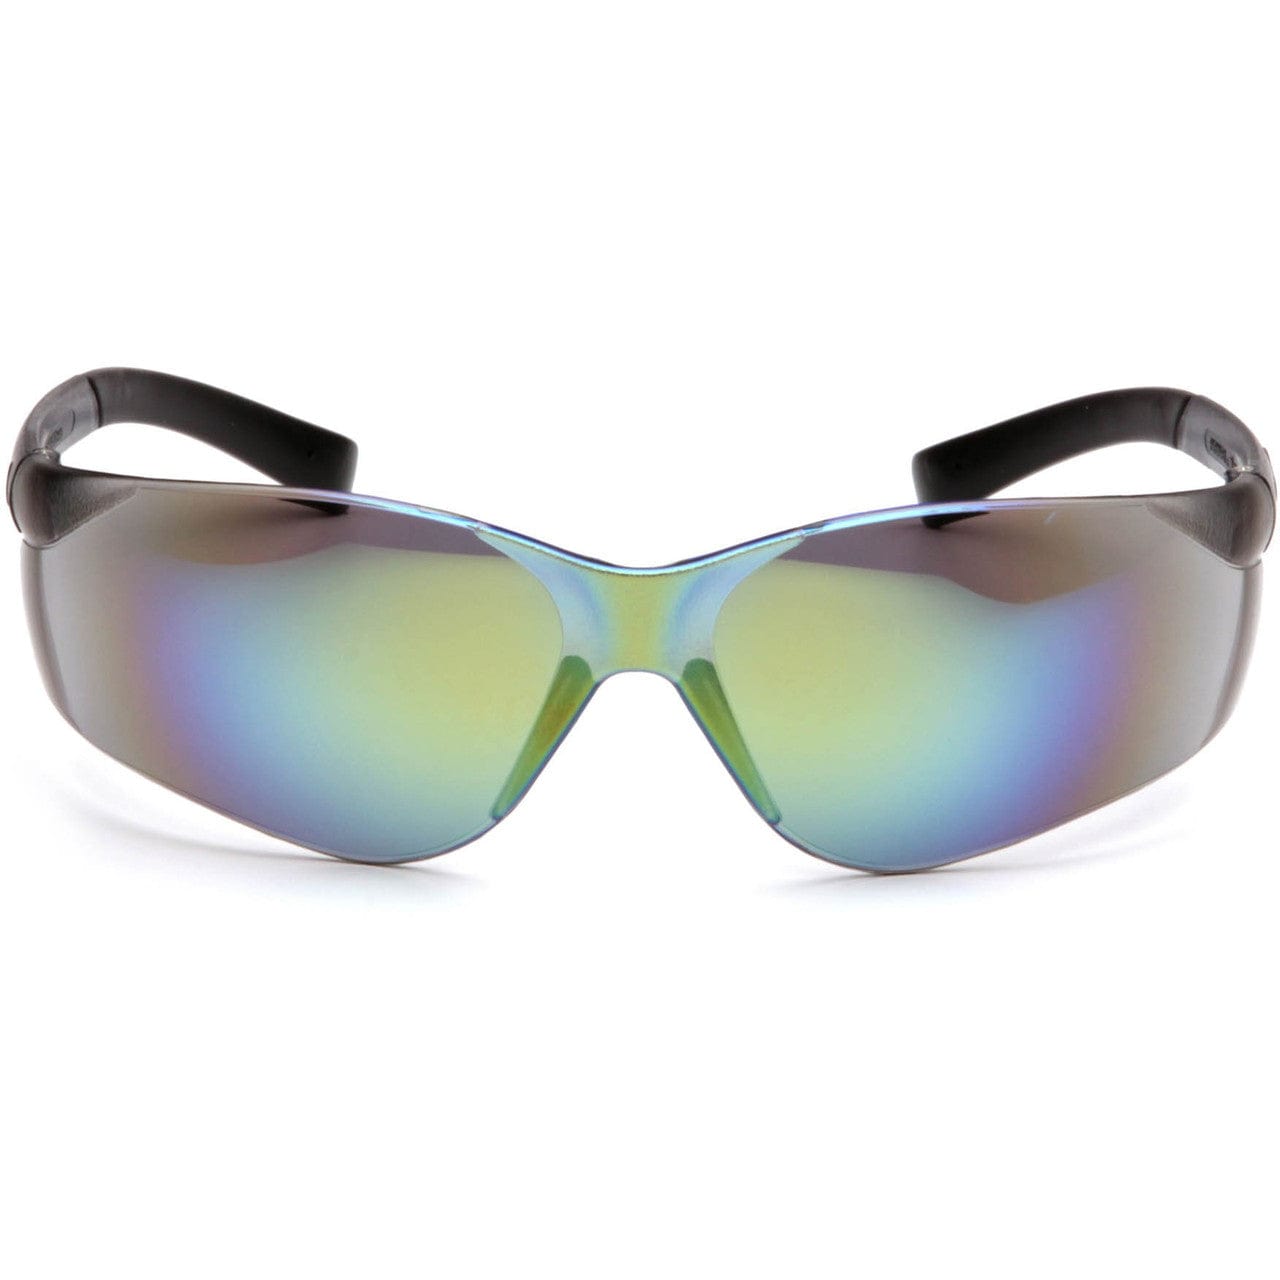 Pyramex Ztek Safety Glasses with Gold Mirror Lens S2590S Front View